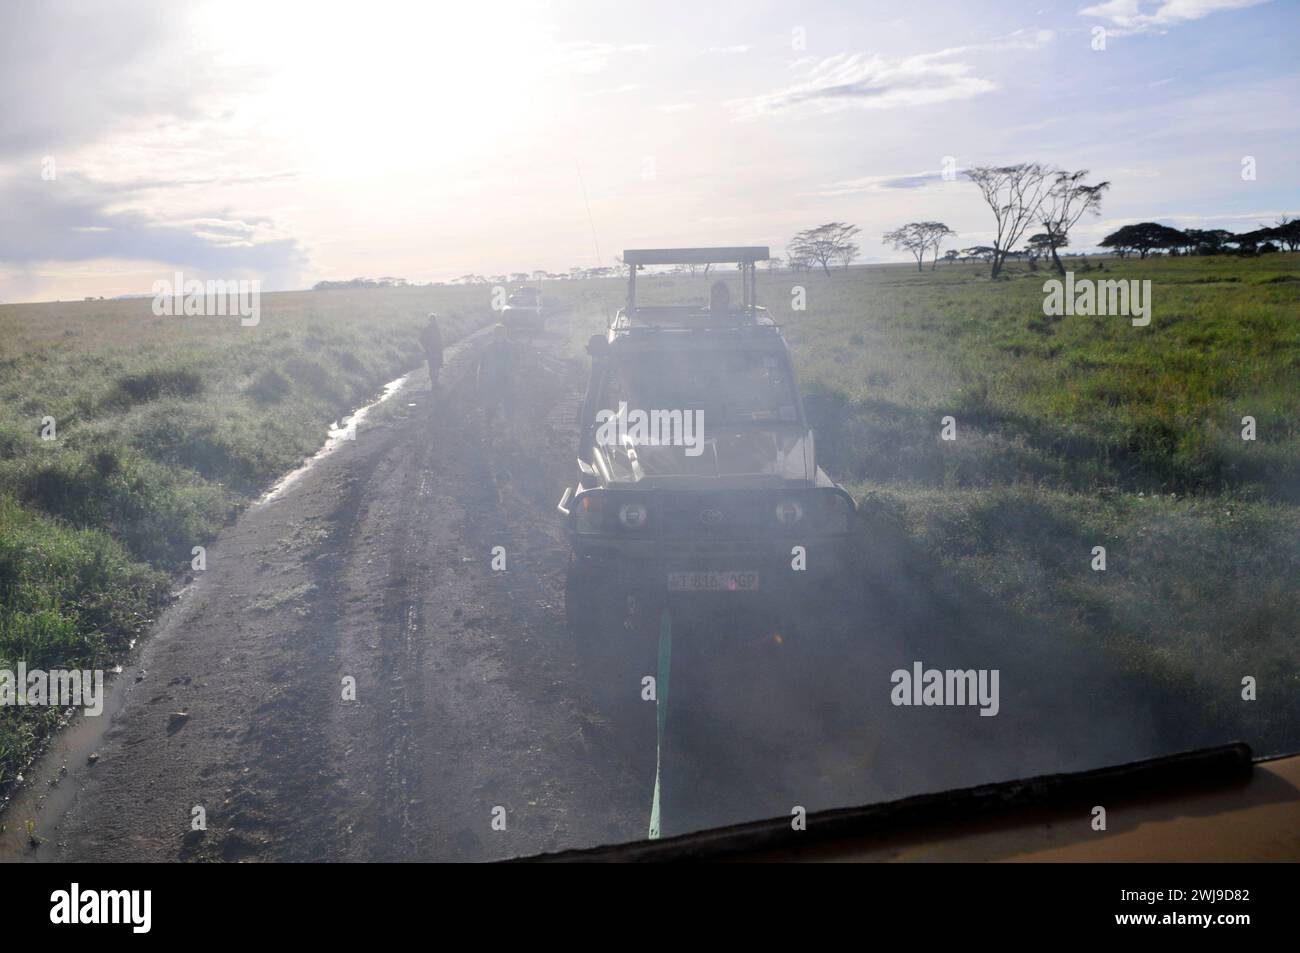 Pulling a stuck safari jeep in a muddy river in the Serengeti National Park in Tanzania. Stock Photo